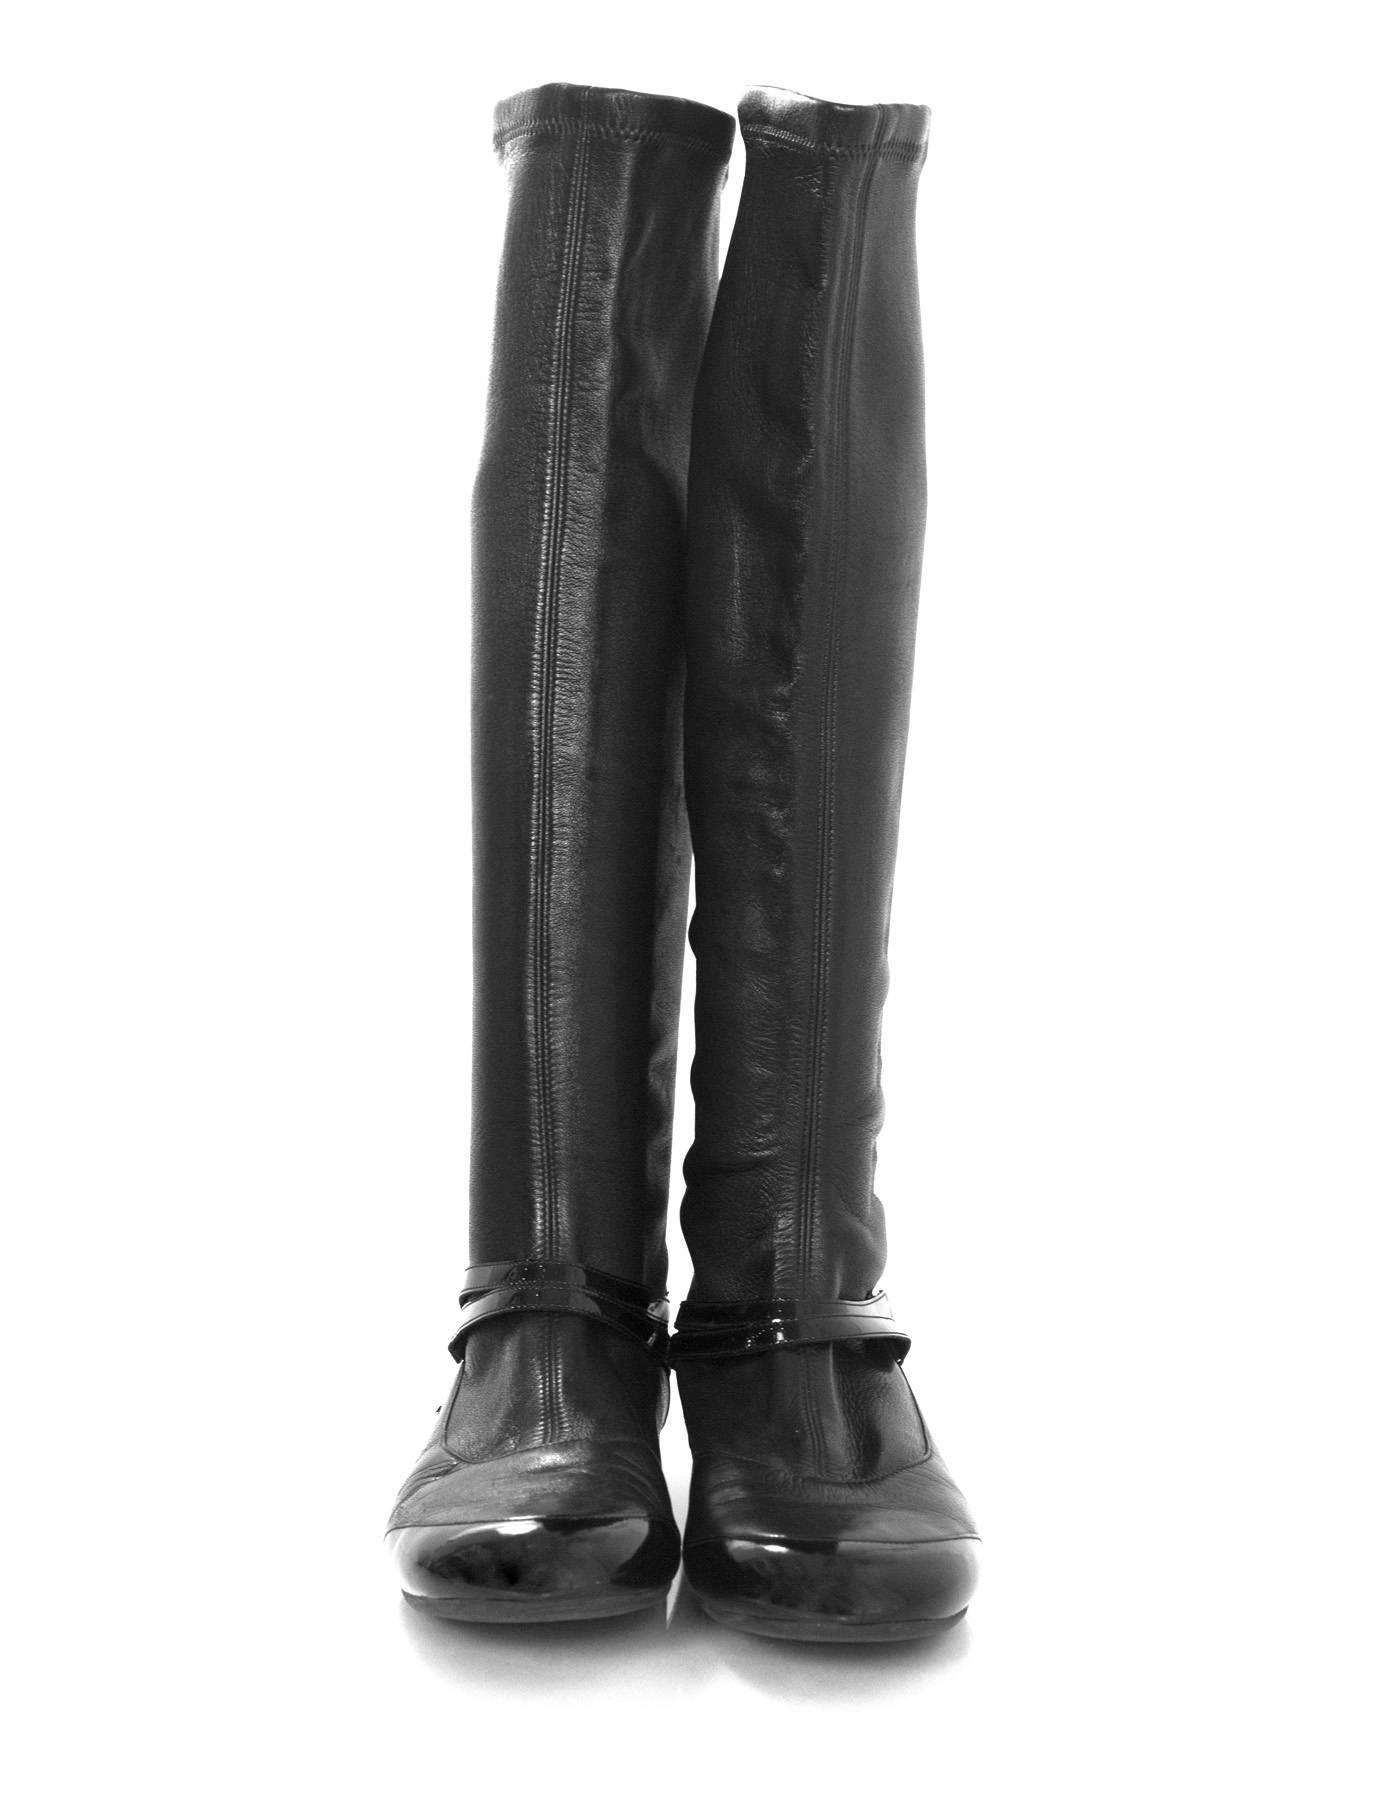 Women's Chanel Black Leather Stretch Boots Sz 36